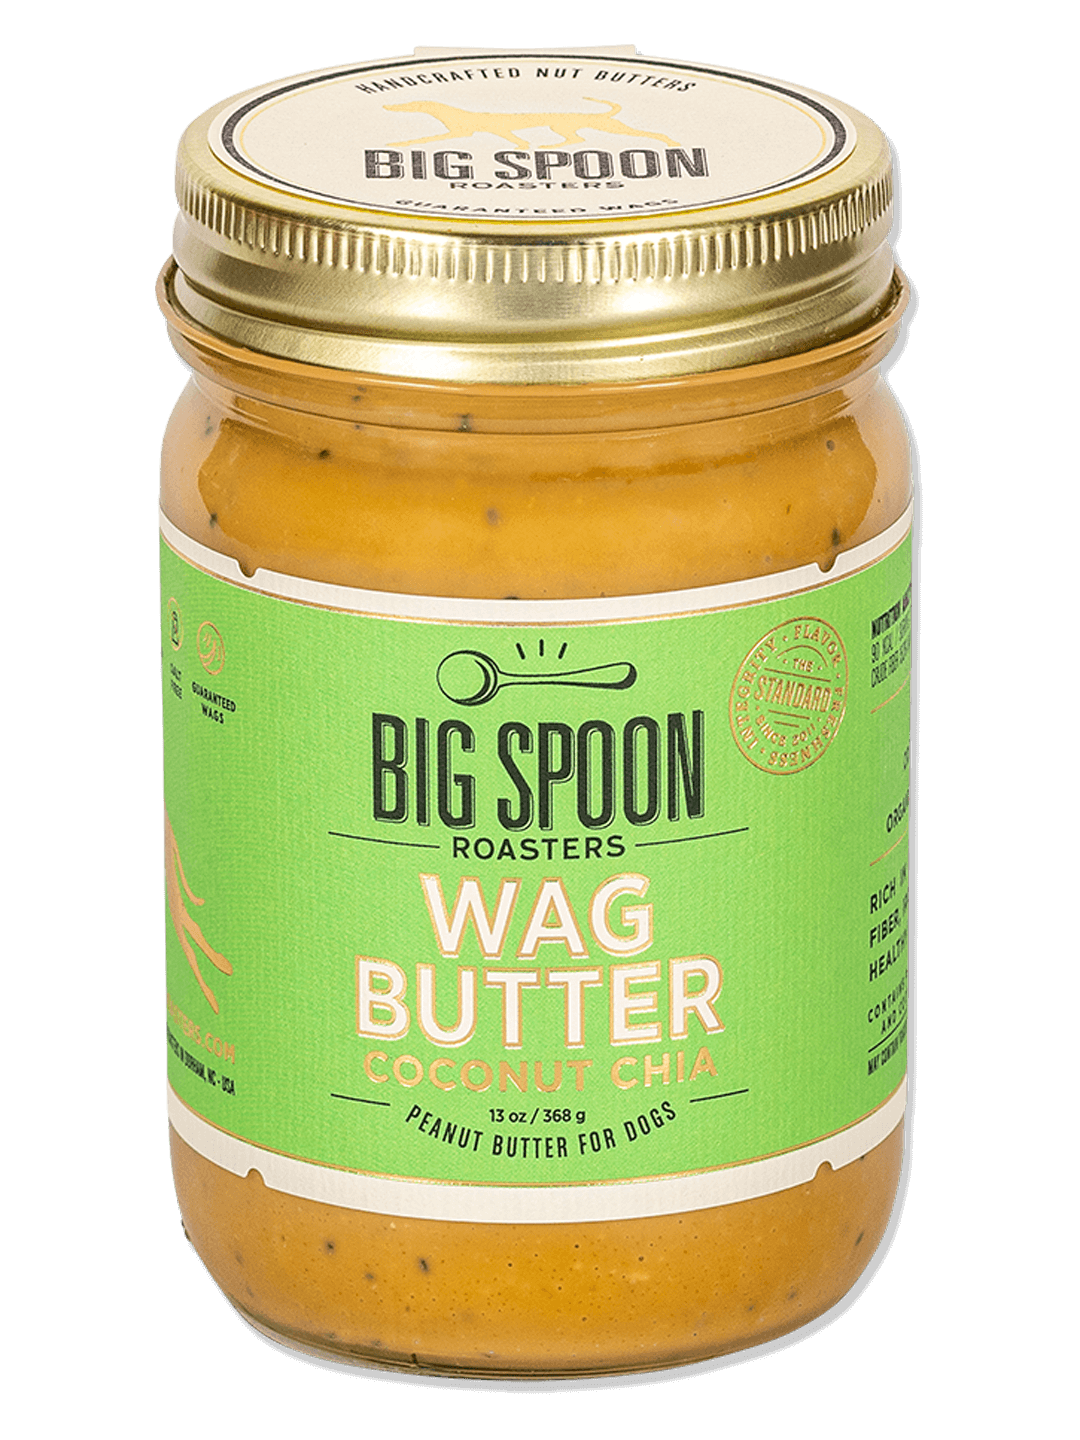 Coconut Chia Wag Butter